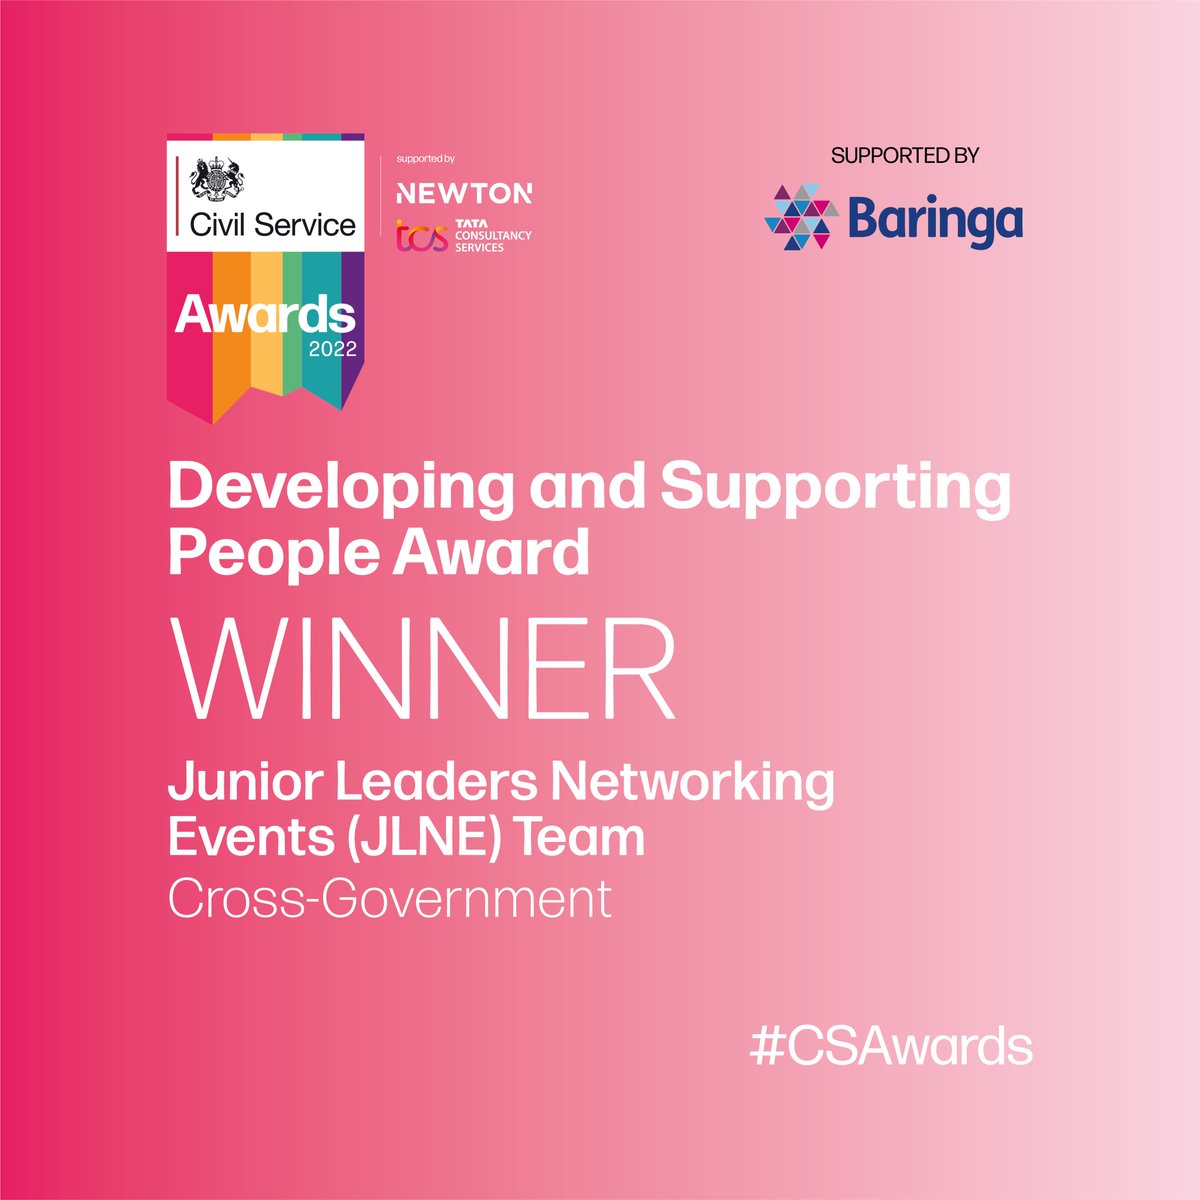 On to the next #CSAward ...
The Developing and Supporting People Award goes to the cross government
Junior Leaders Networking (JLNE) Team
Well done to all the team!